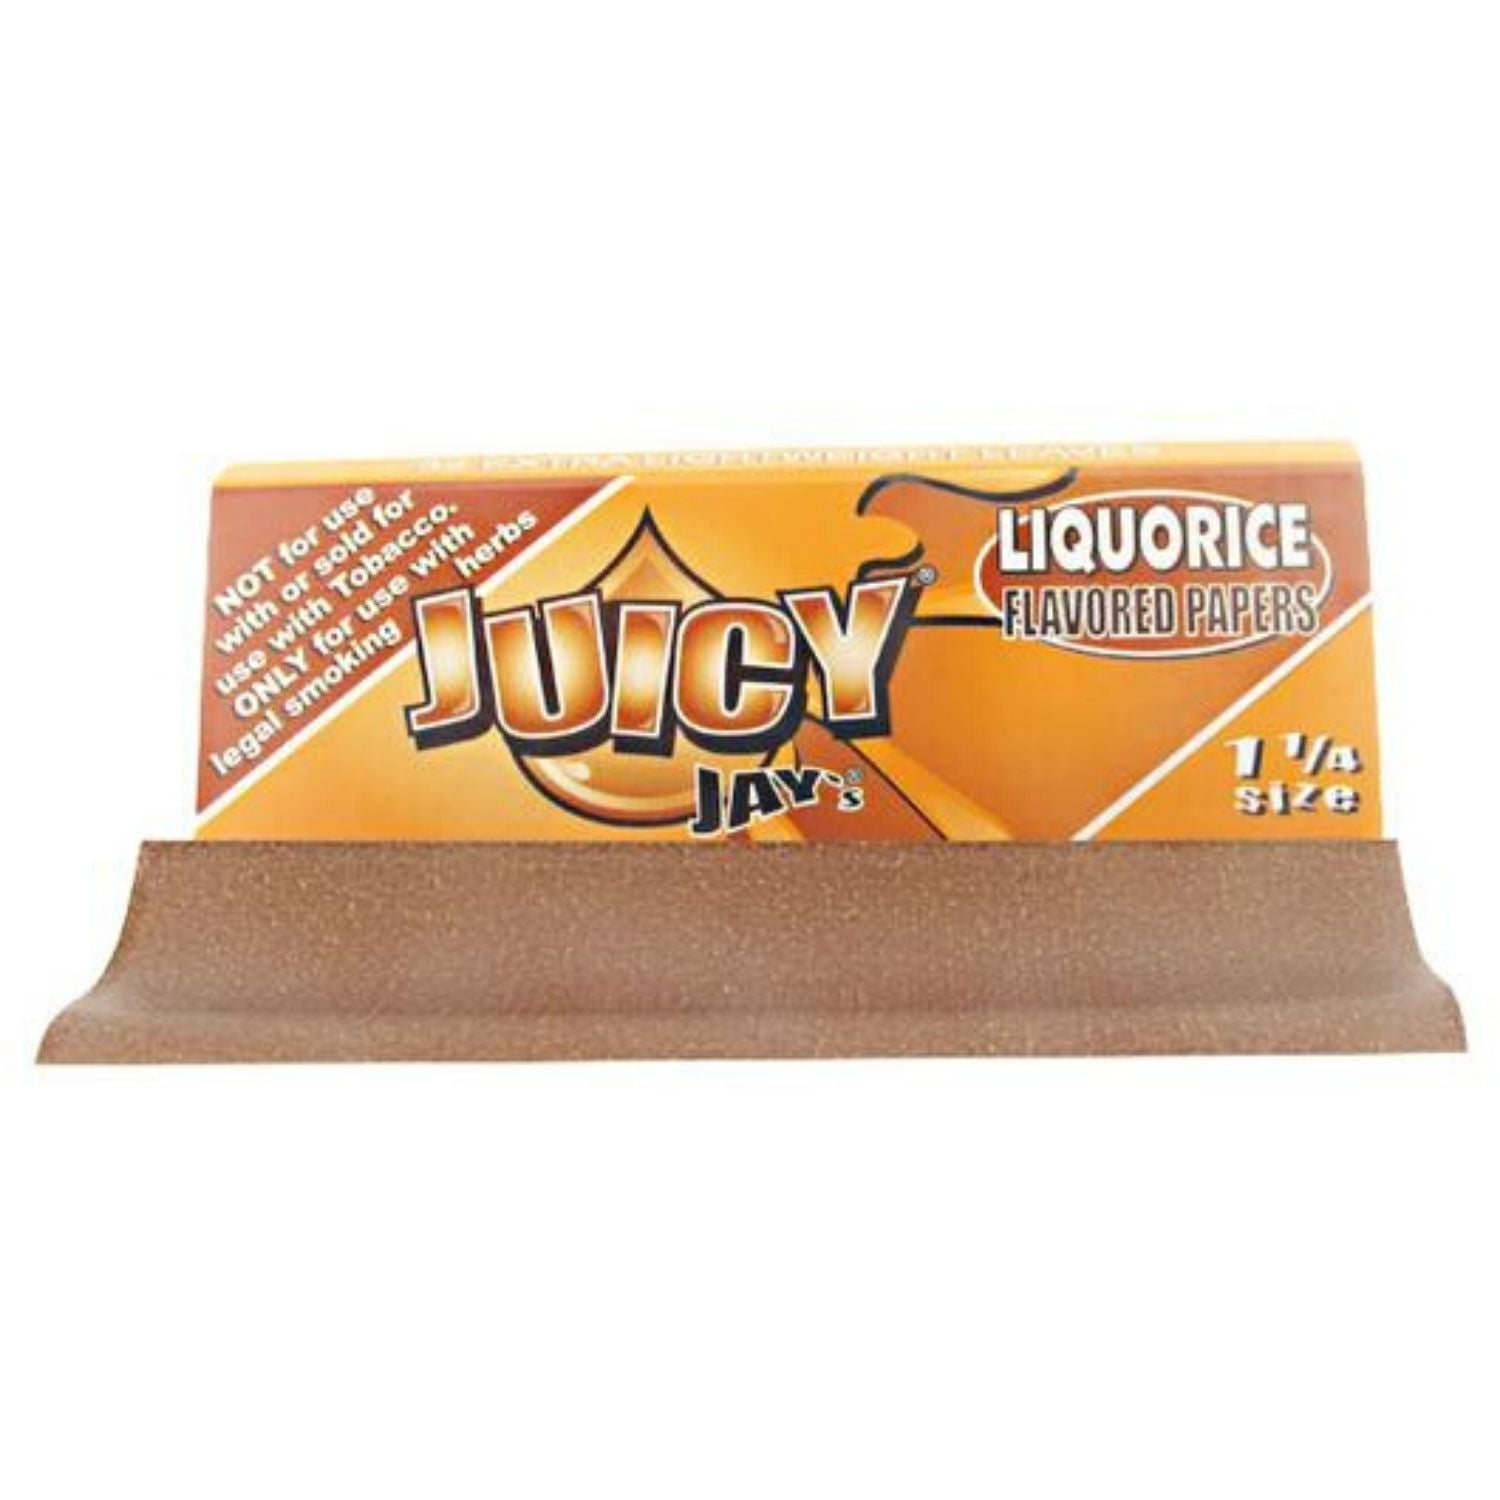 Juicy Jay Rolling Papers - Liquorice Flavor - 1 1/4 Size